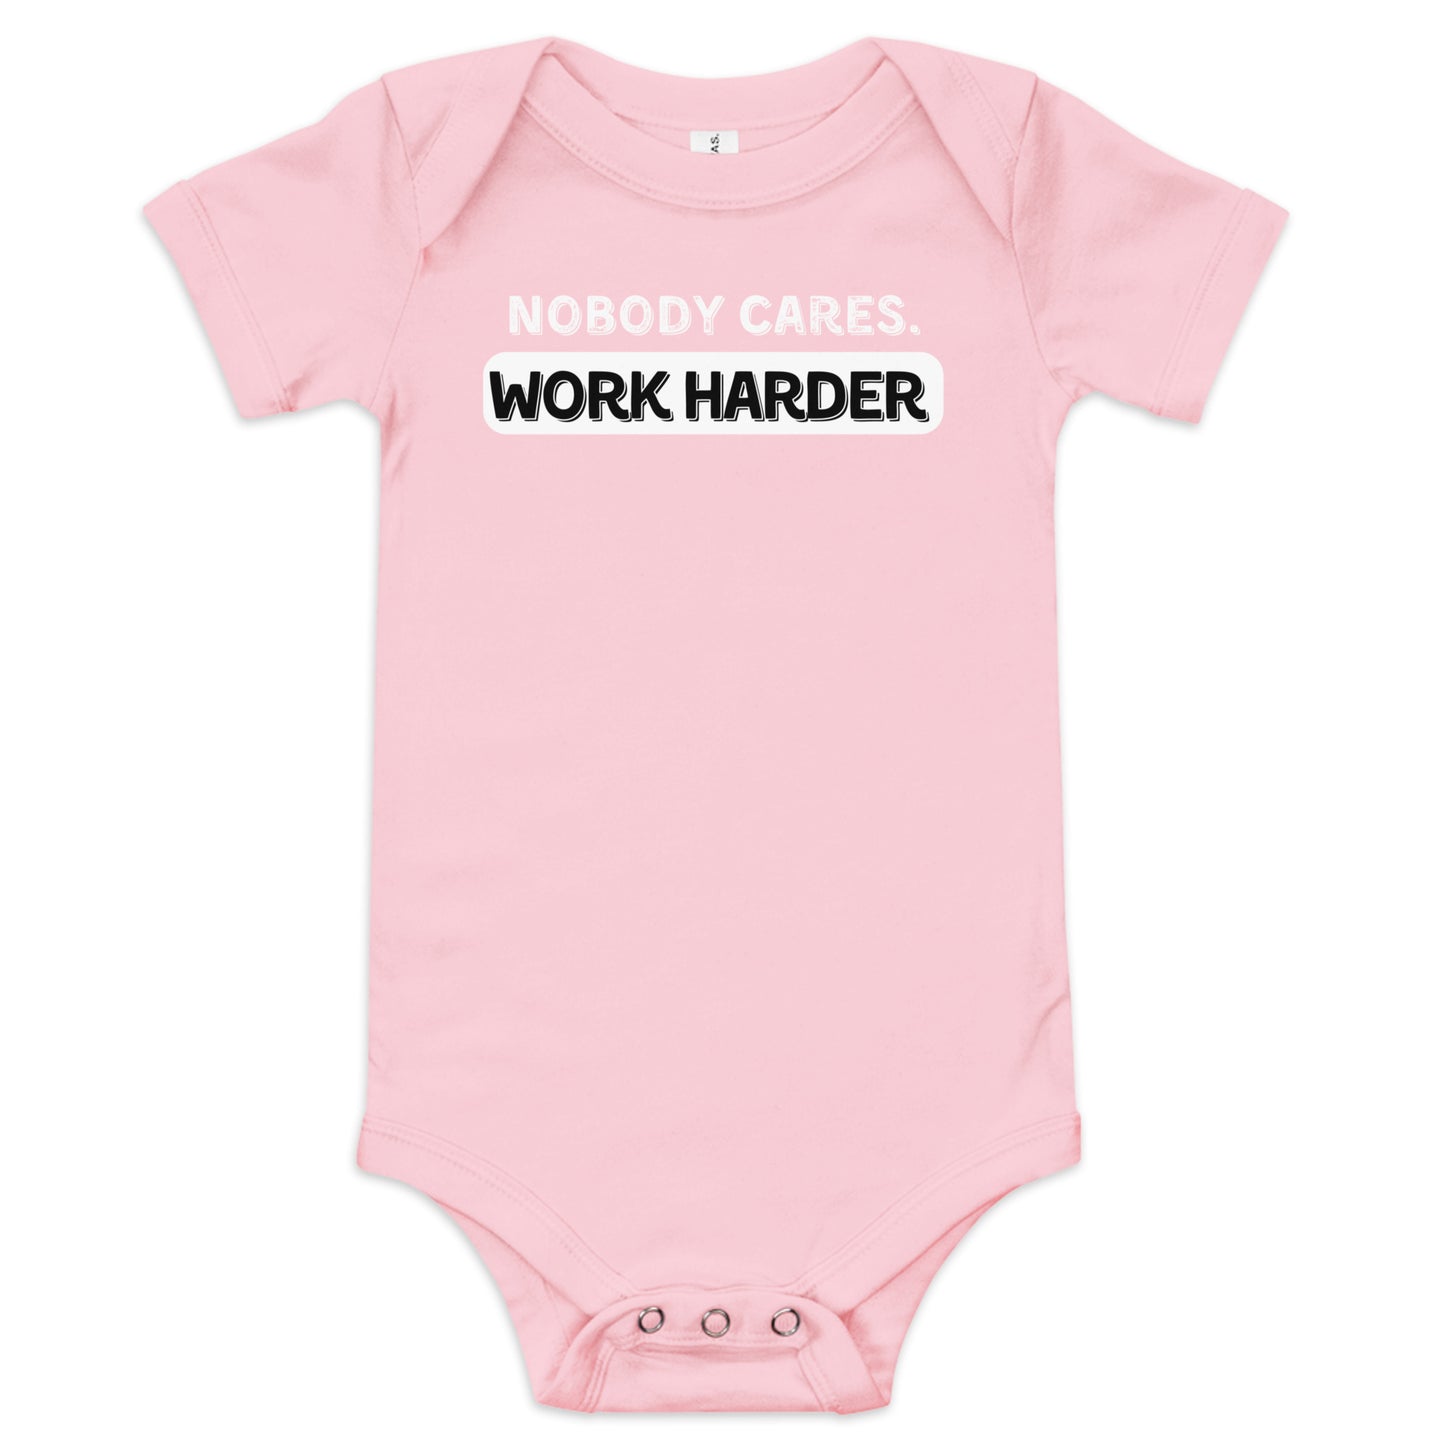 Nobody Cares. Work Harder Baby Edition